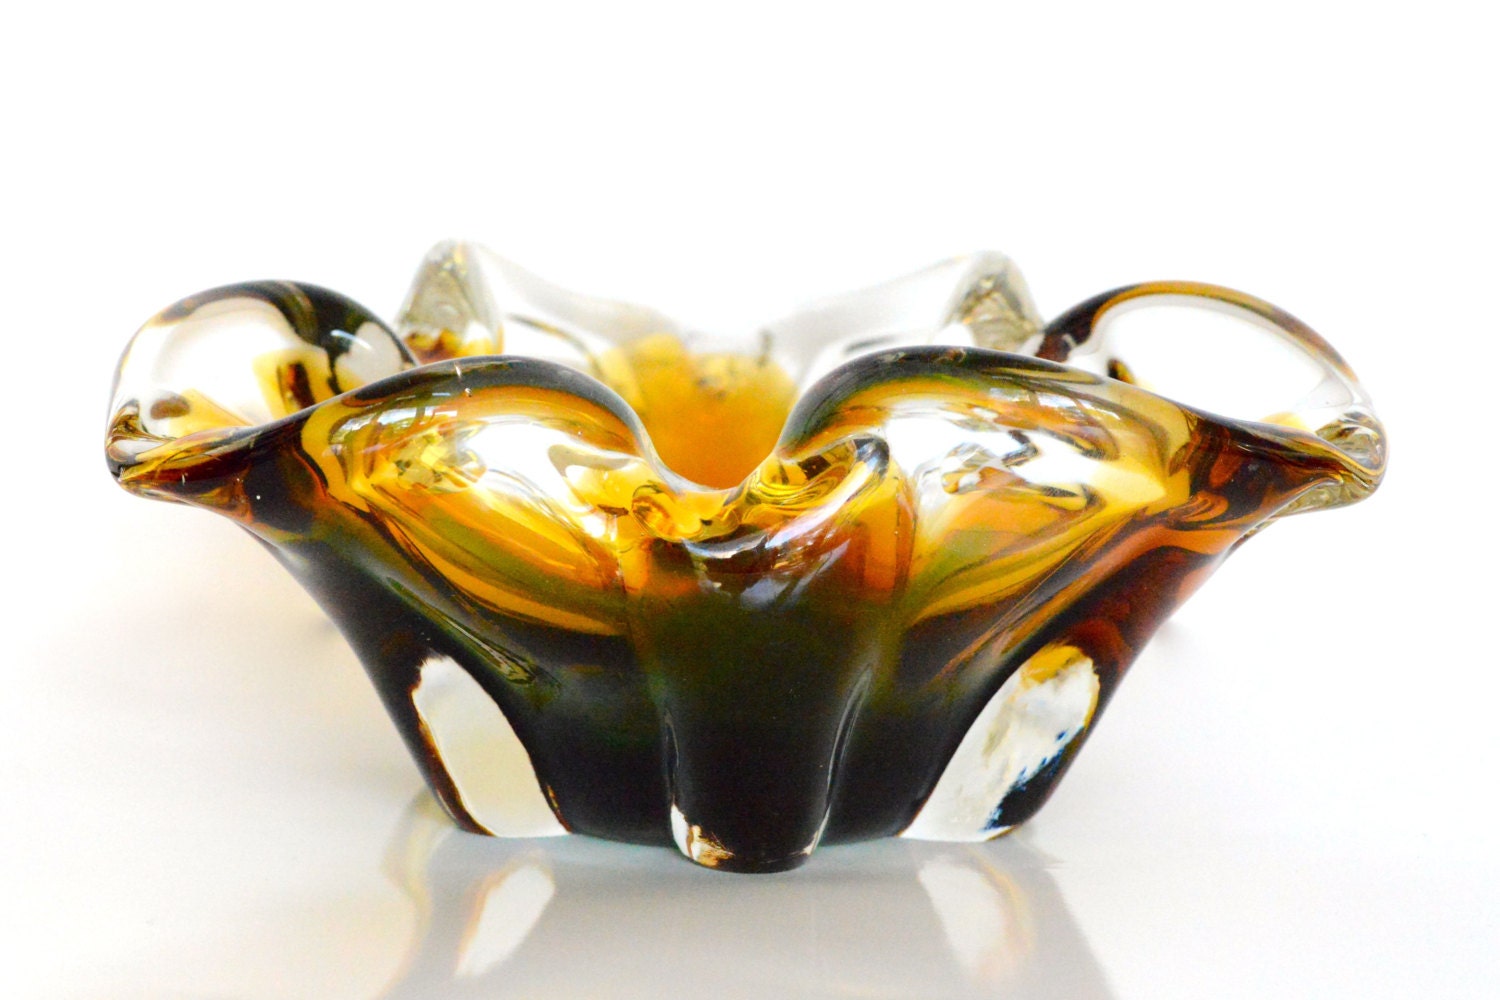 Toffee and emerald green vintage hand-blown glass ashtray - ThatRetroPiece